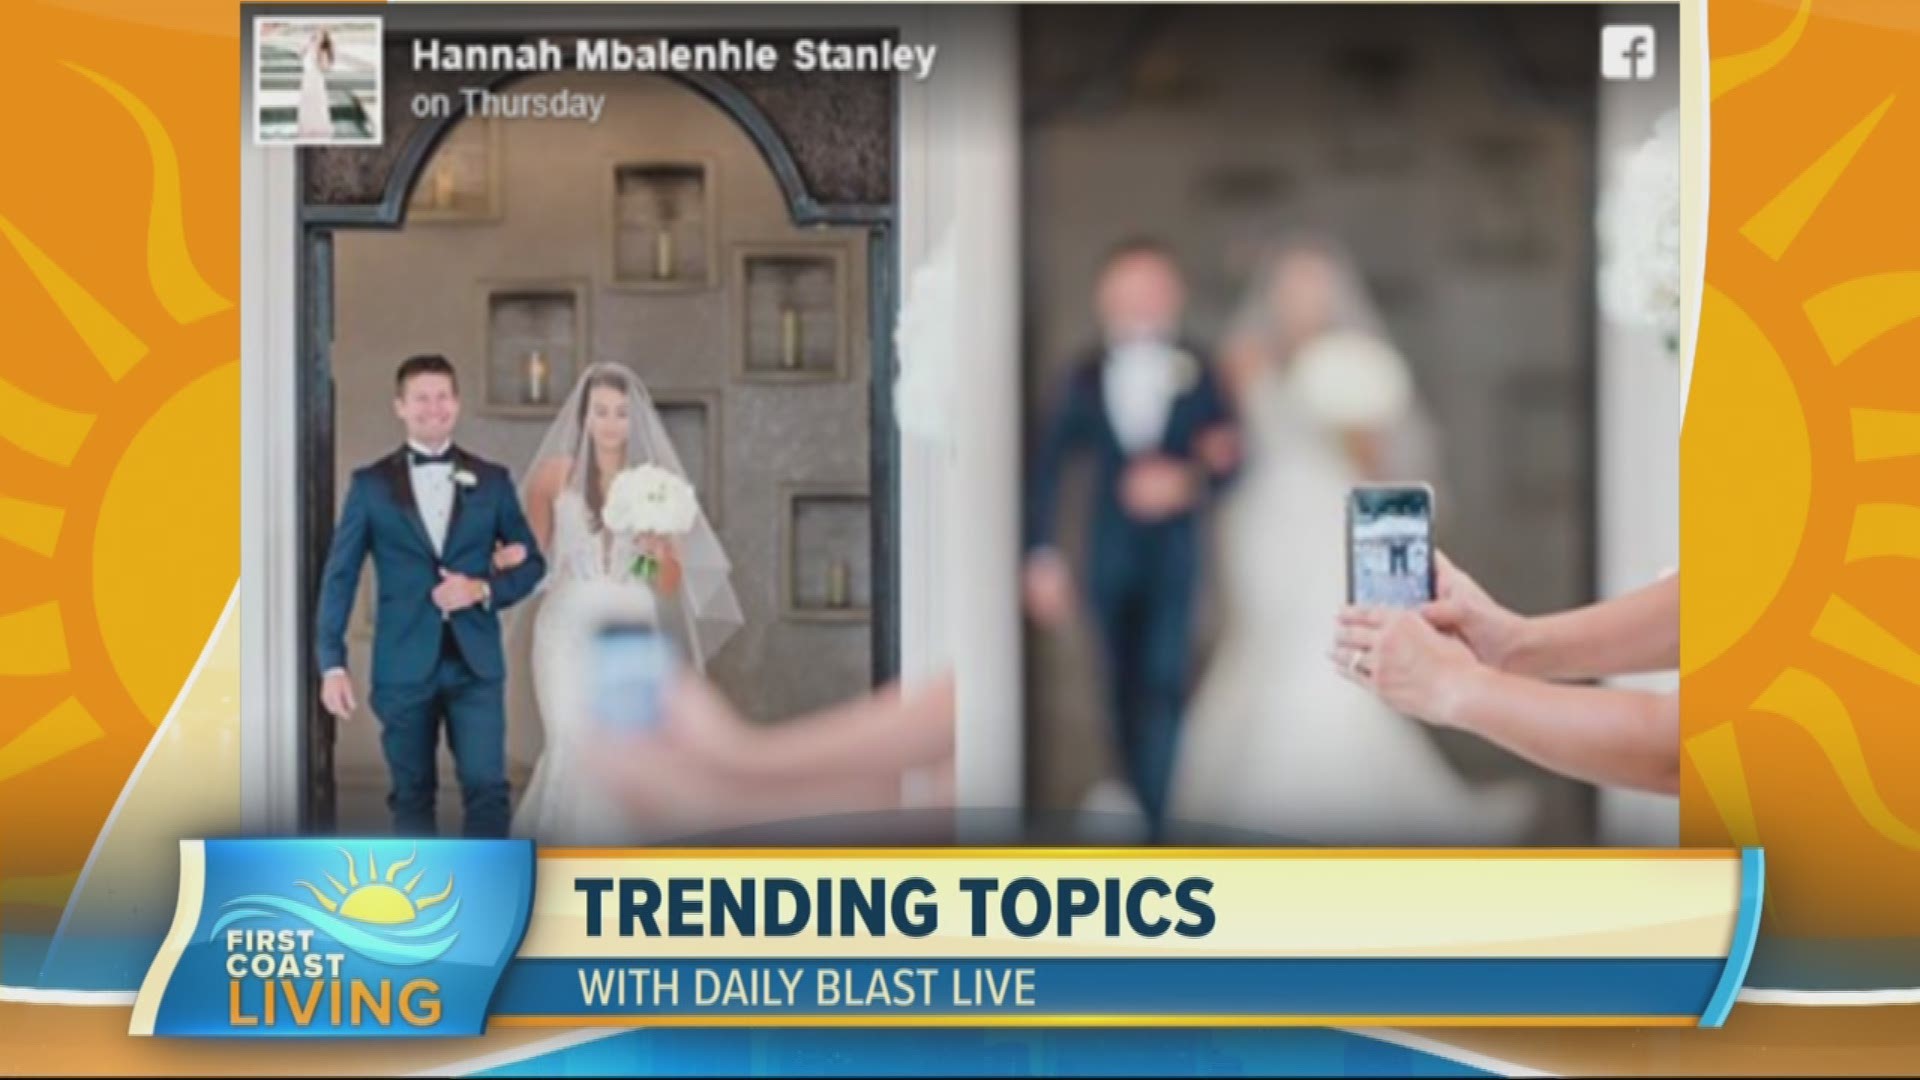 It's never a dull conversation when the hosts of Daily Blast Live share their thoughts on the latest trending topics.